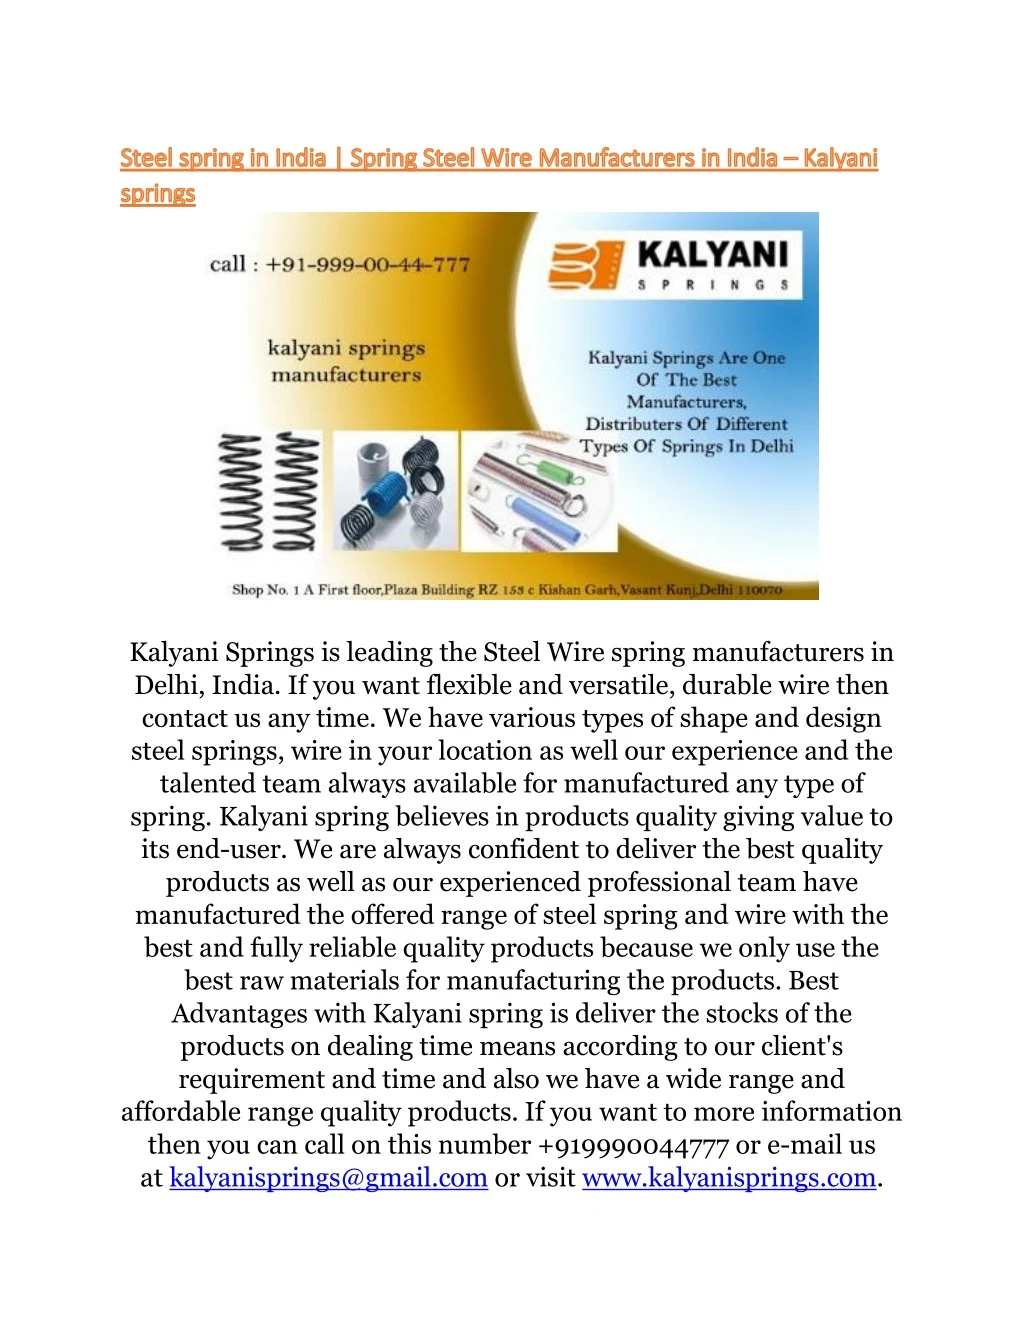 kalyani springs is leading the steel wire spring